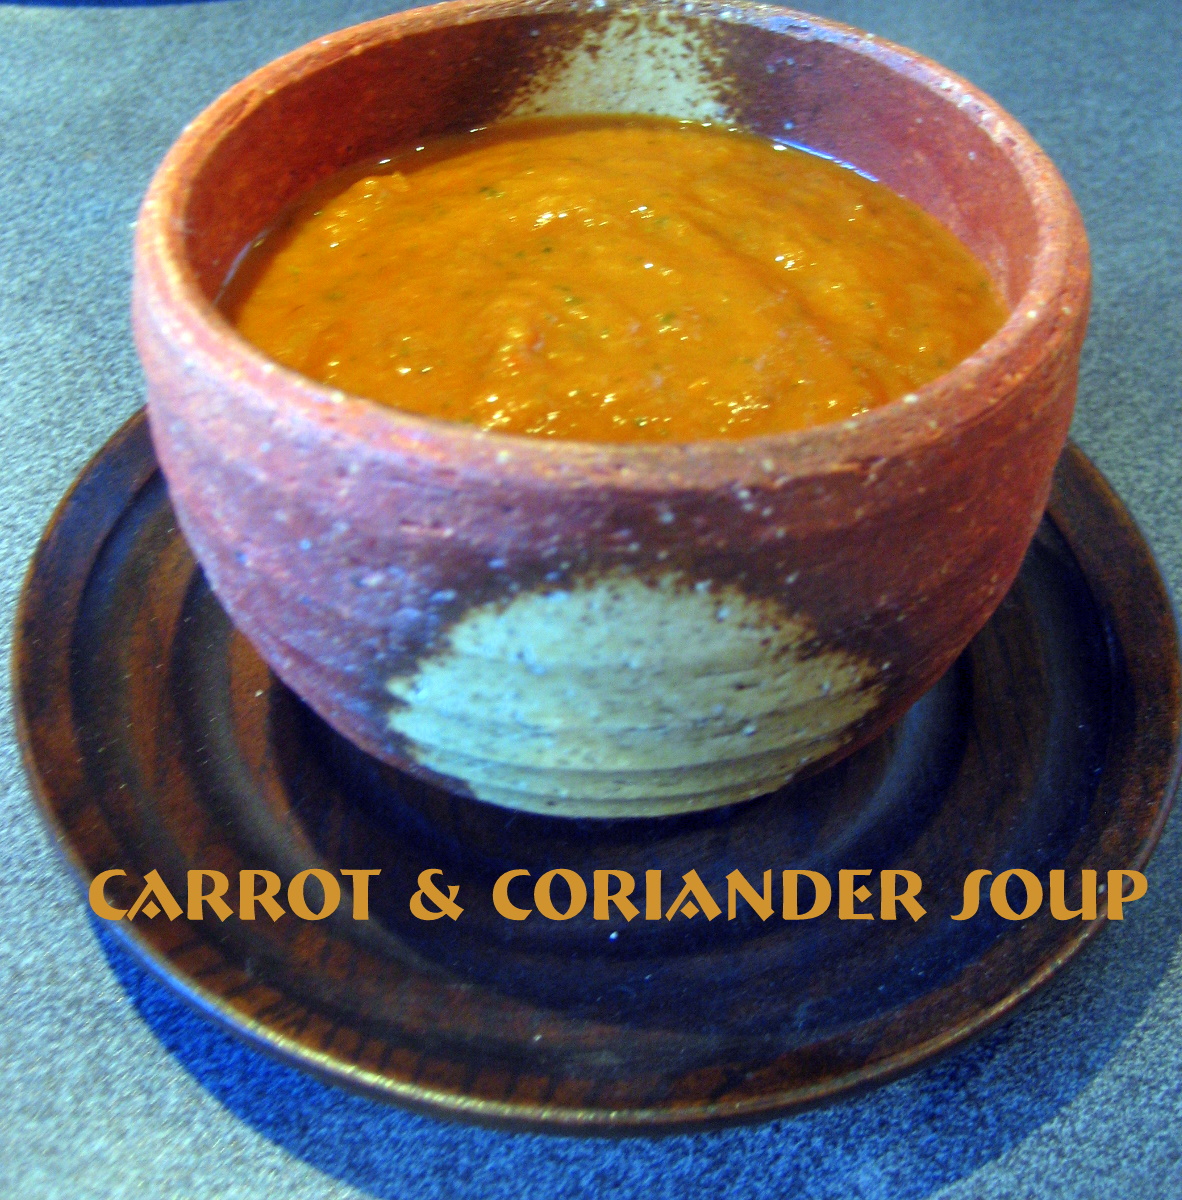 PEBBLE SOUP: Carrot and Coriander Soup